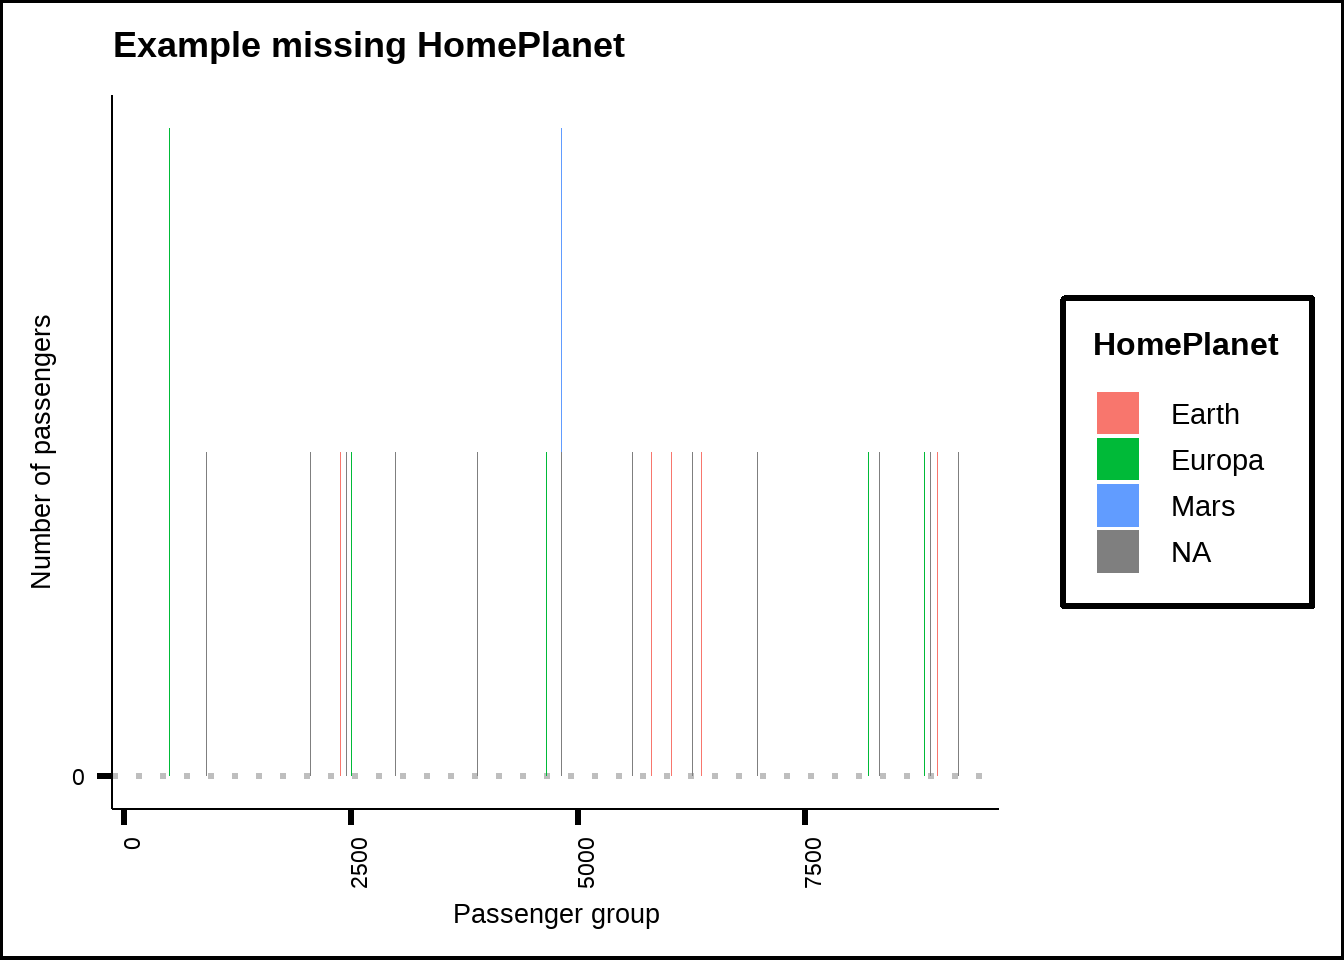 Sample of missing values for HomePlanet